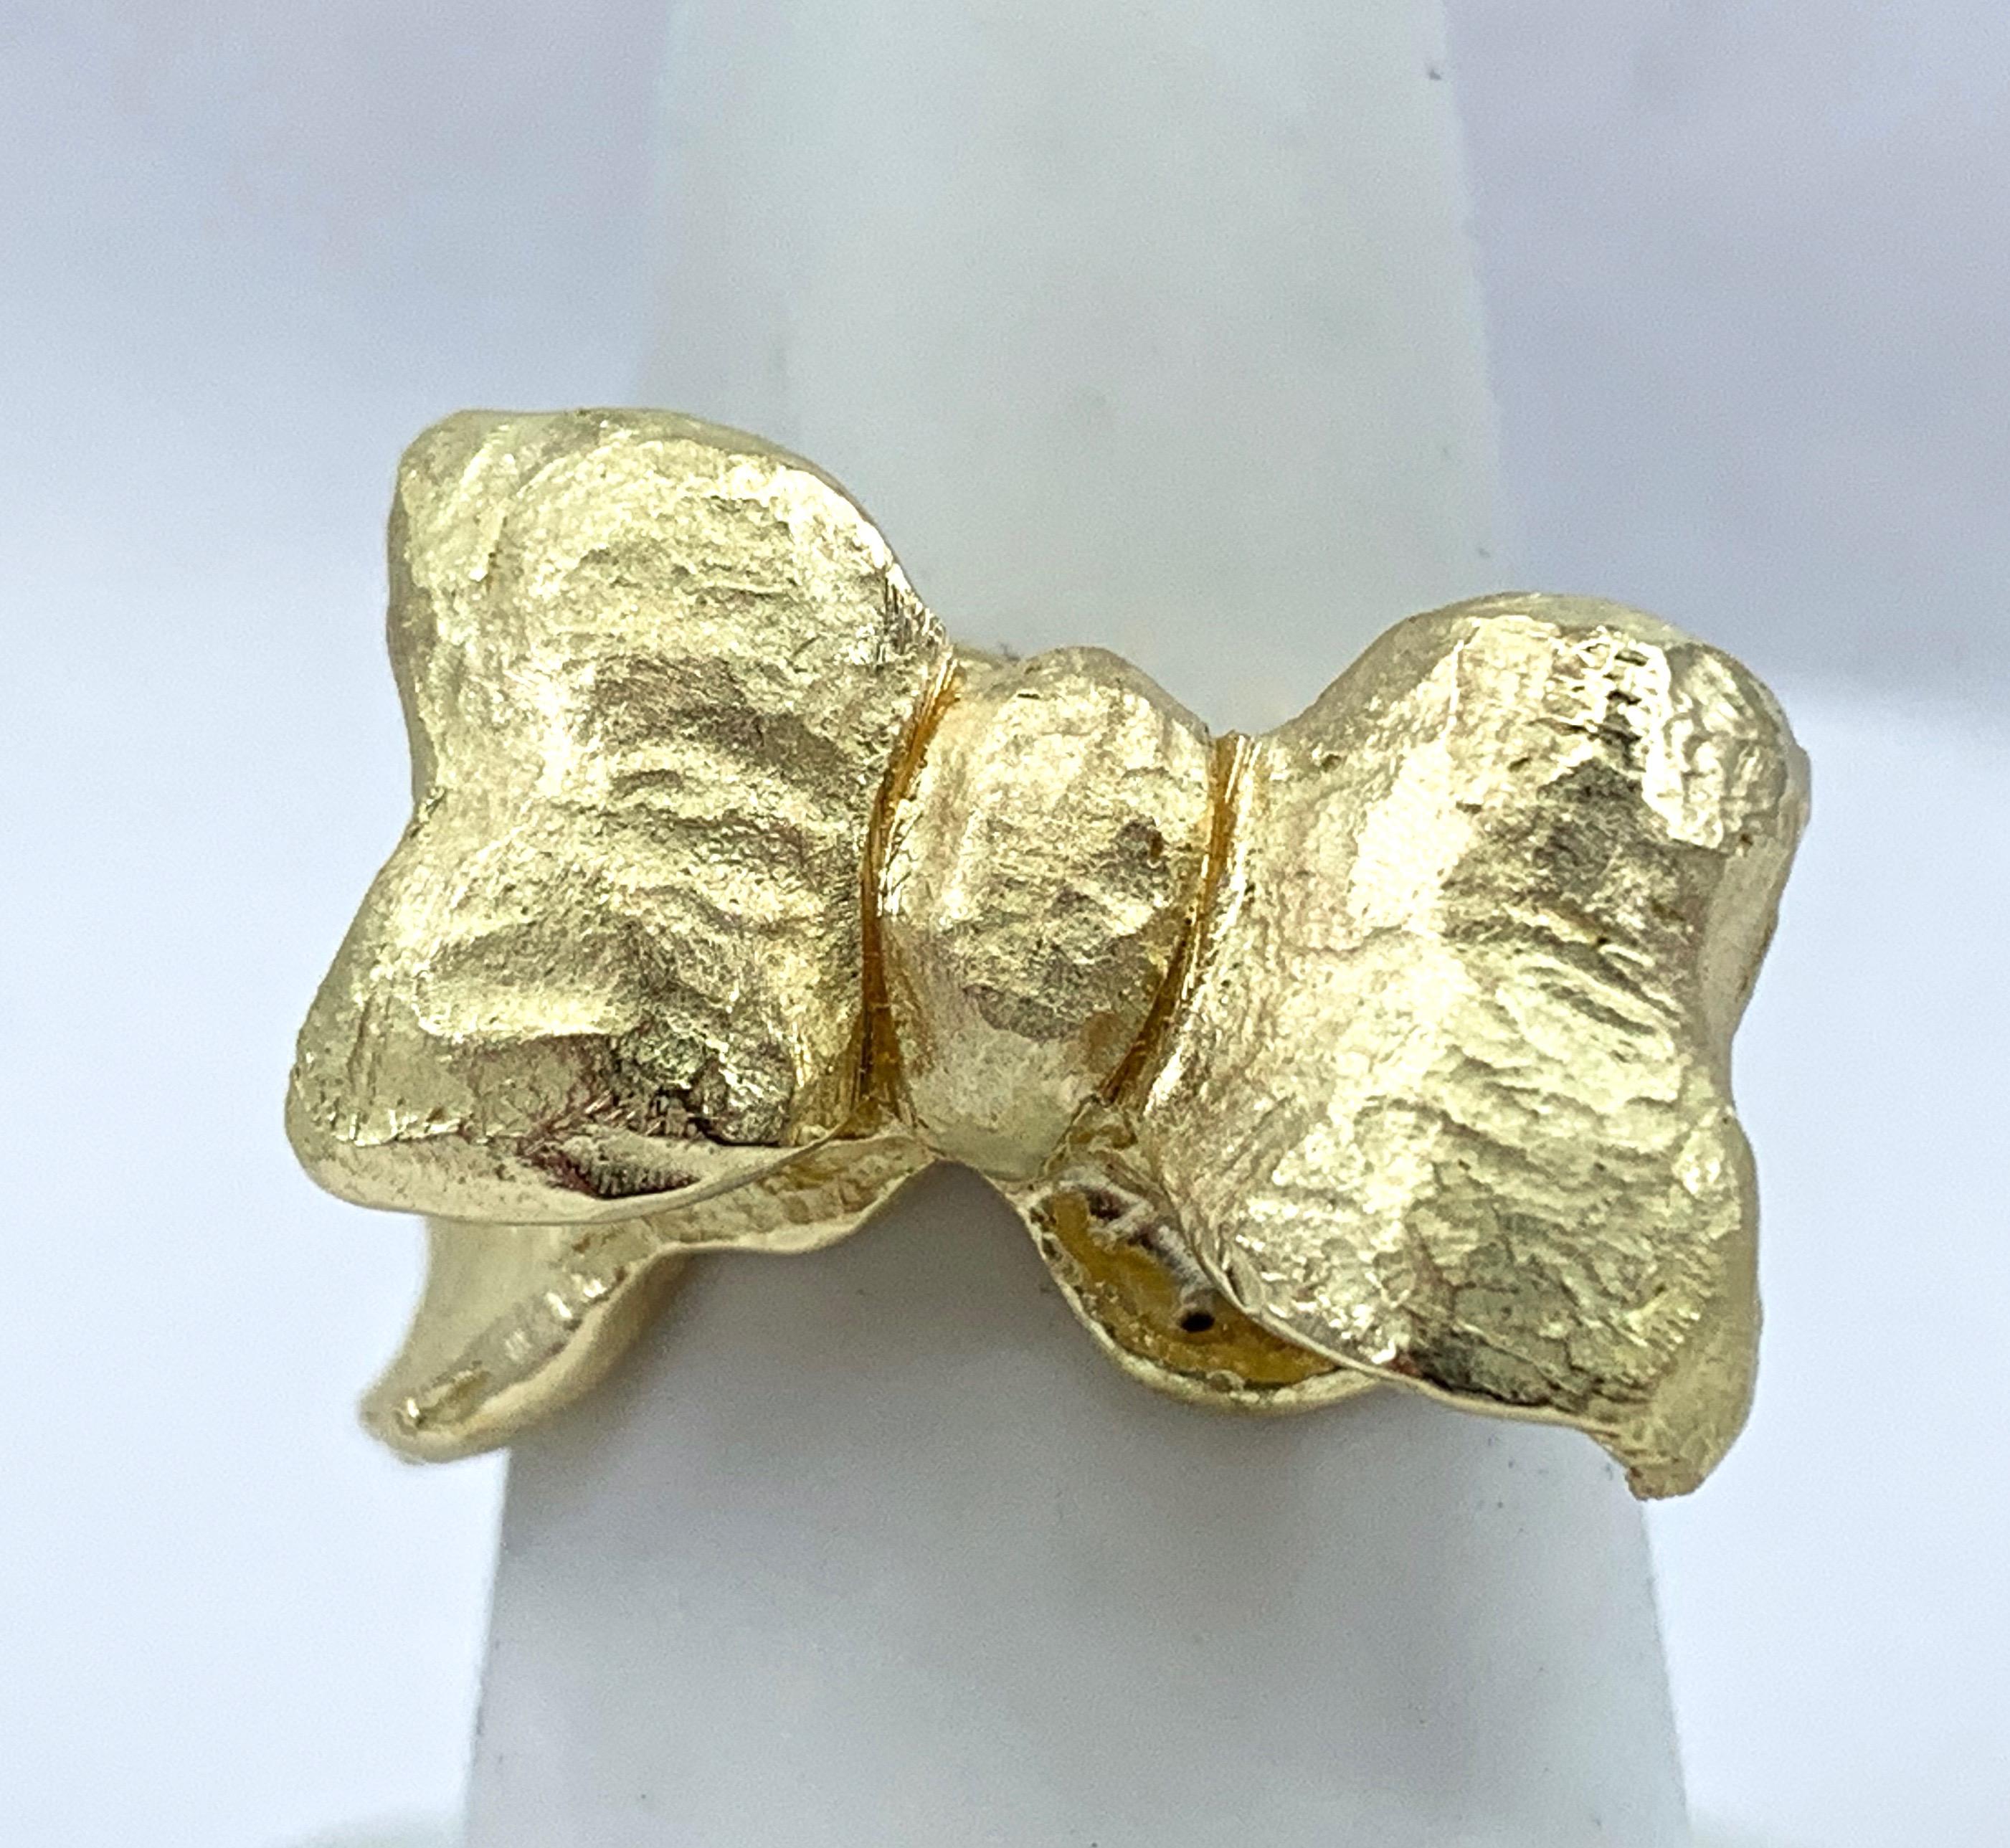 Eytan Brandes designed this fun, oversized and flattering ring in our shop and crafted it using a hand-sculpted wax mold.  It's one-of-a-kind and features a glossy satin finish with polished edges to add depth and definition.

Just like a real bow,